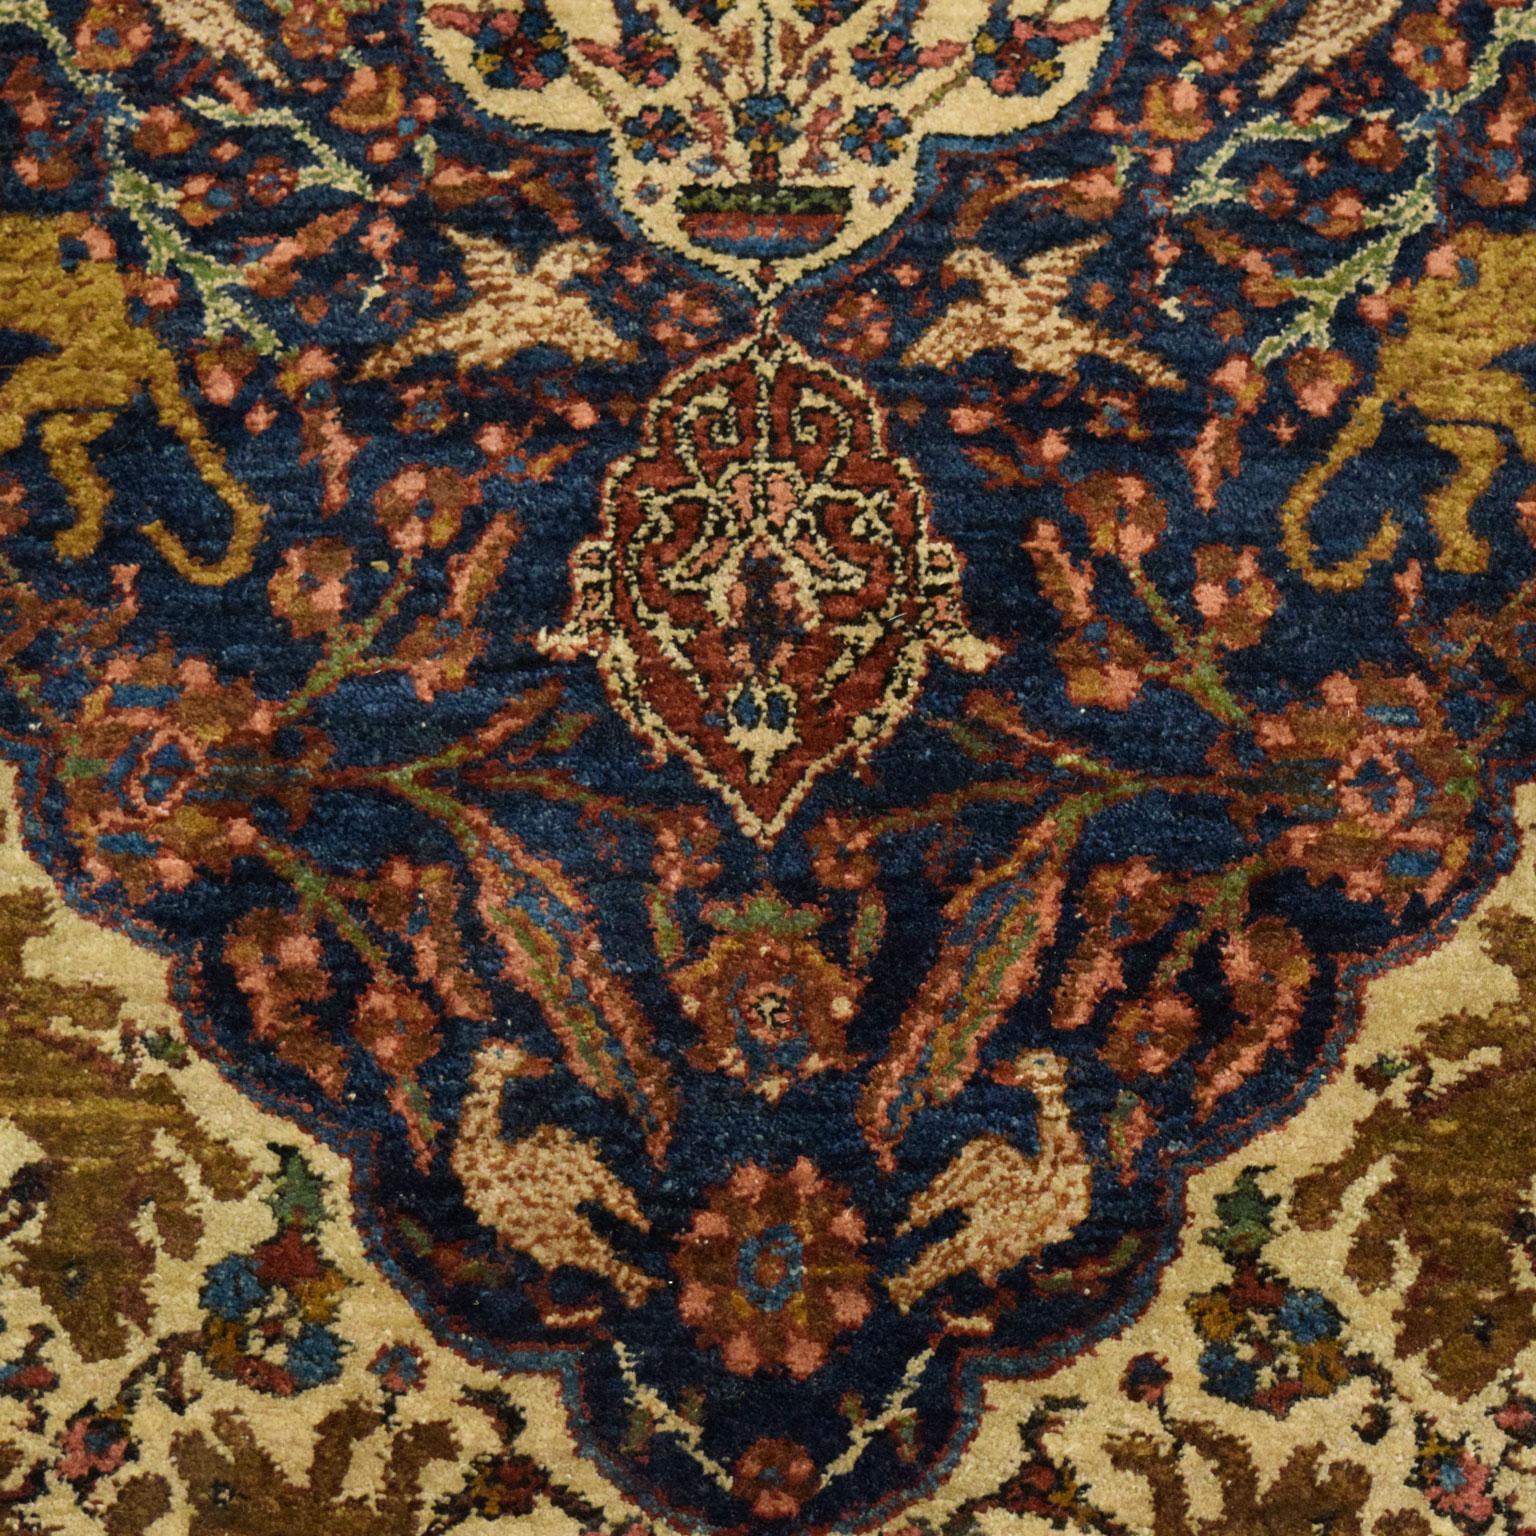 Tabriz Antique 1900s Wool Persian Khoy Rug in Cream, Green, and Indigo, 5' x 8' For Sale